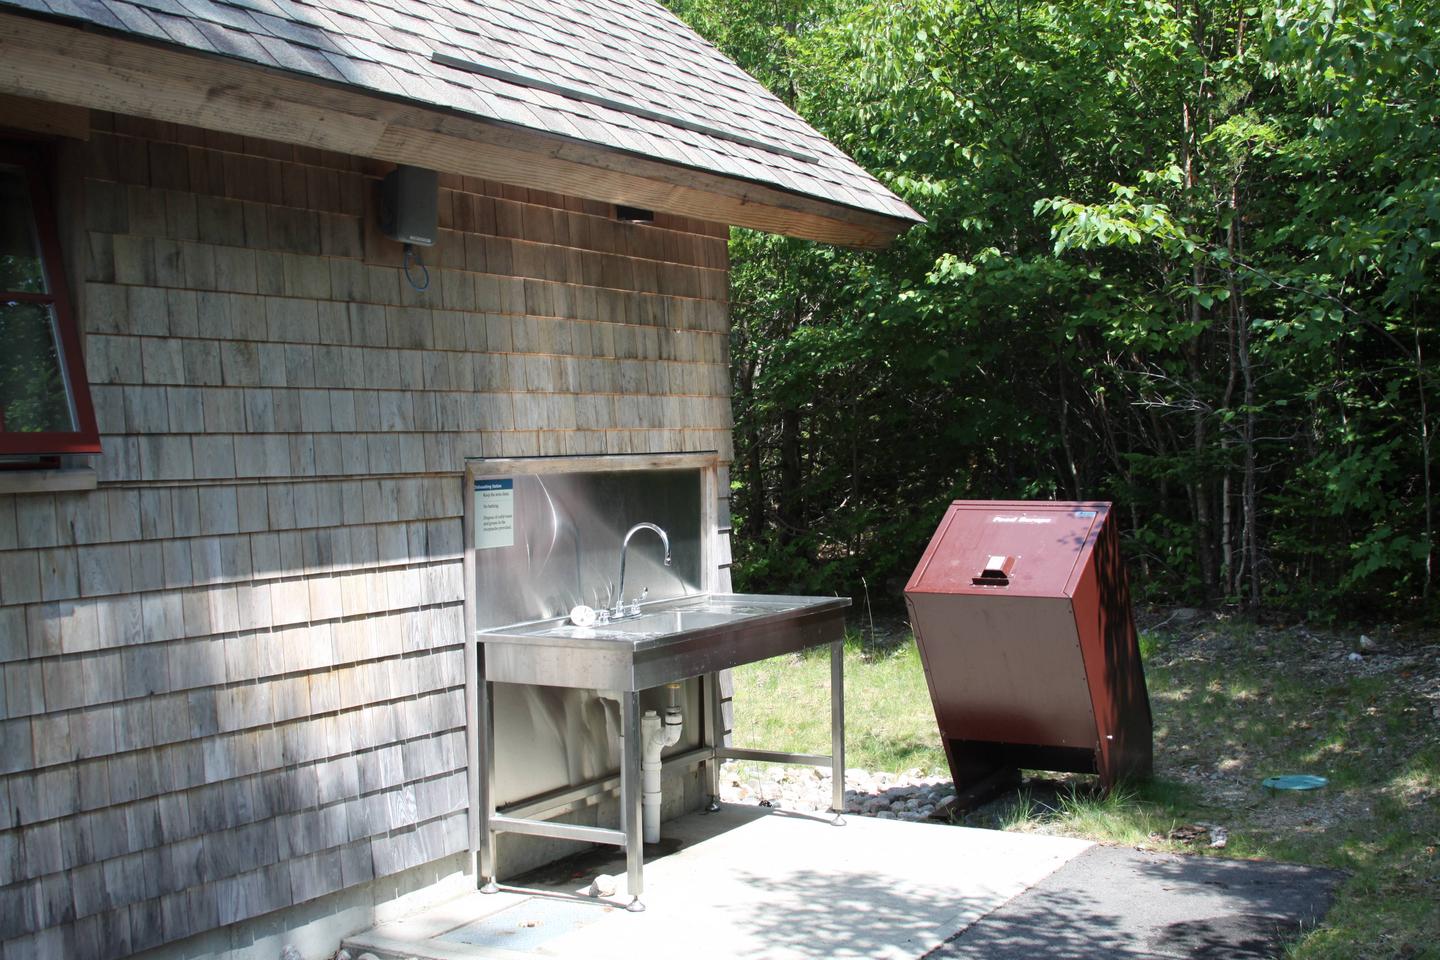 Stainless steel sink on outside of a cedar shingle sided building with bear proof trash can.A typical dish-washing Station